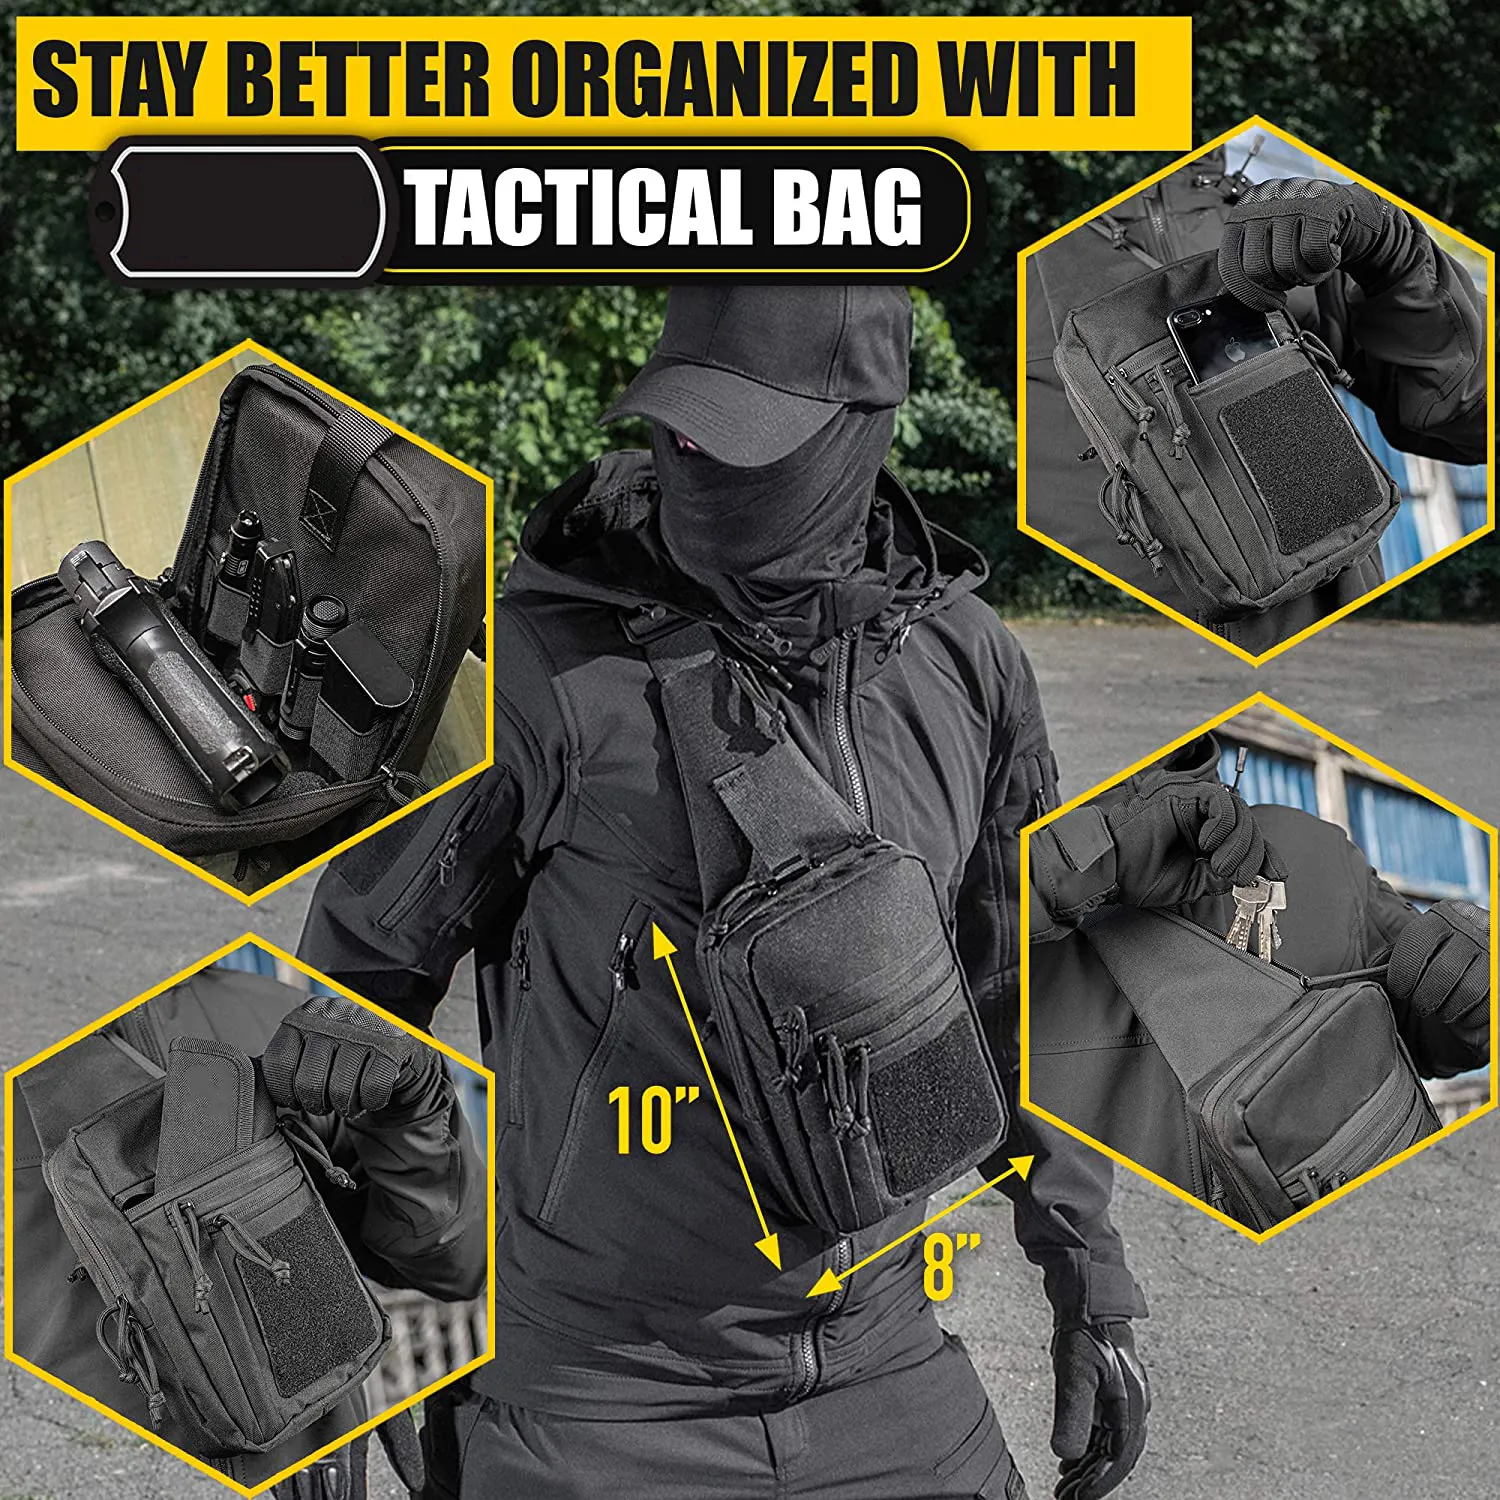 Military Tactical Backpack With Gun Holster For Handguns